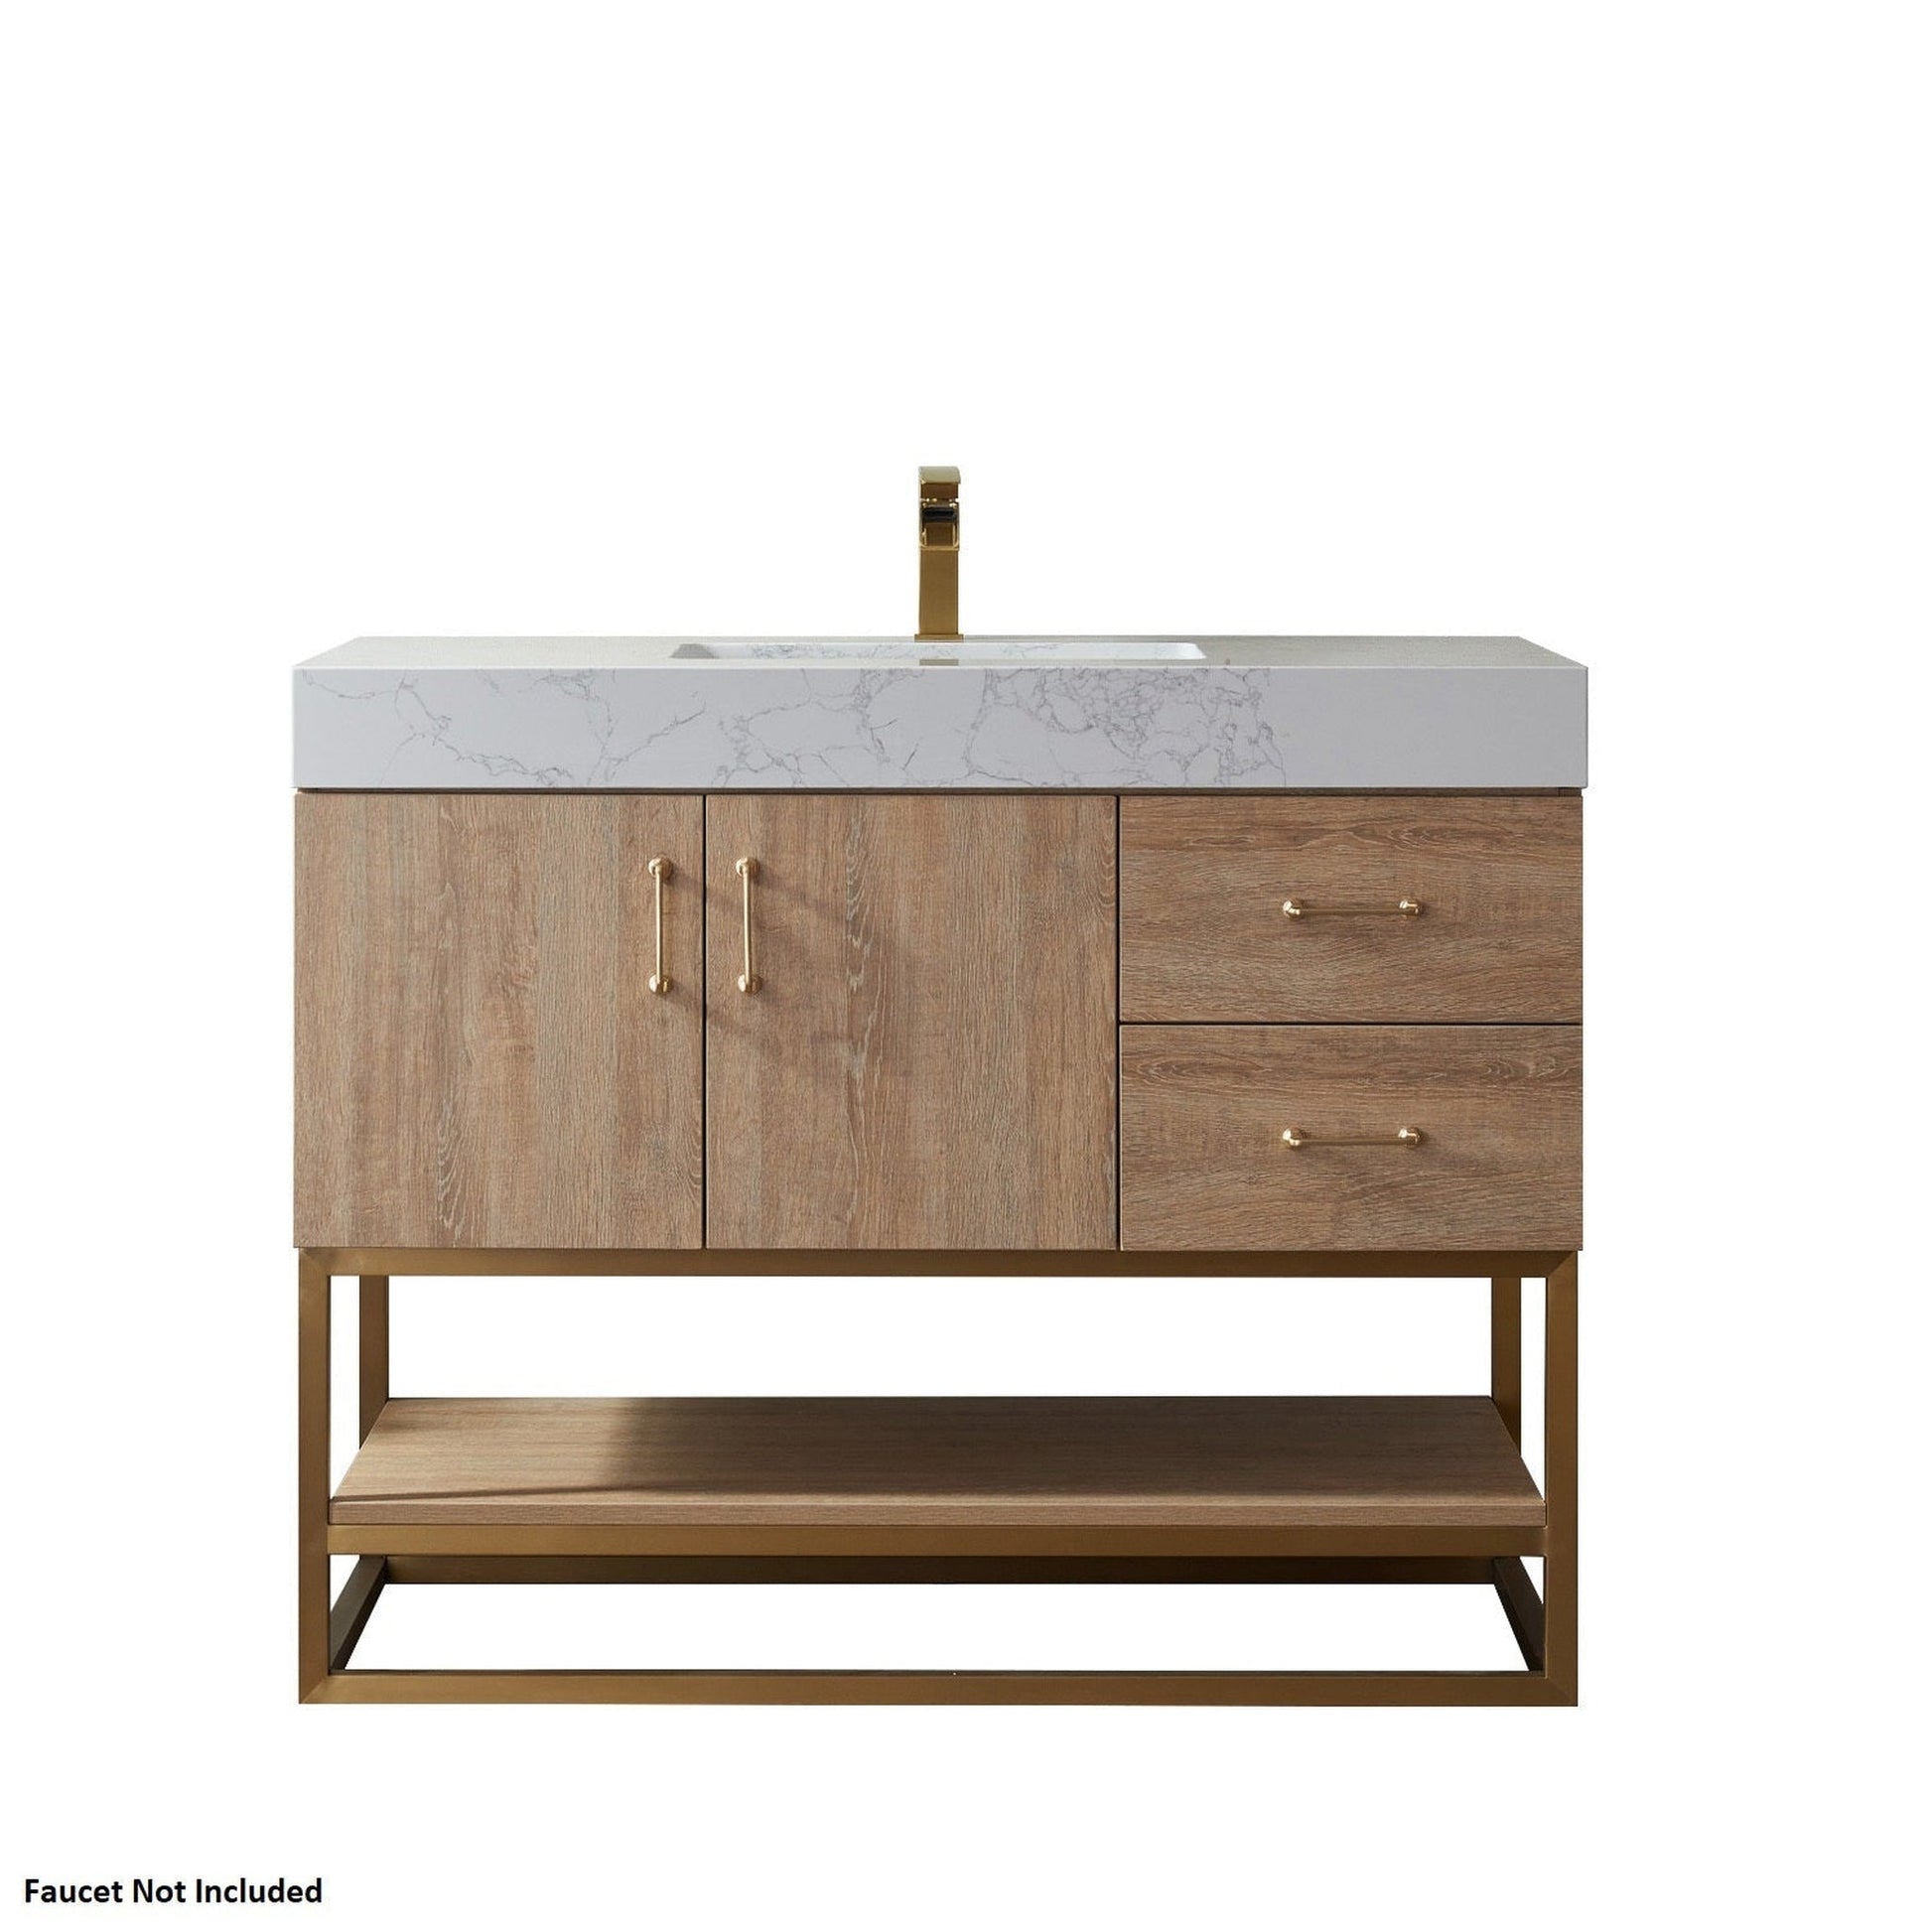 Vinnova Alistair 42" North American Oak Freestanding Single Vanity Set In Brushed Gold Metal Bracket Support Base and White Grain Stone Top With Undermount Ceramic Sink